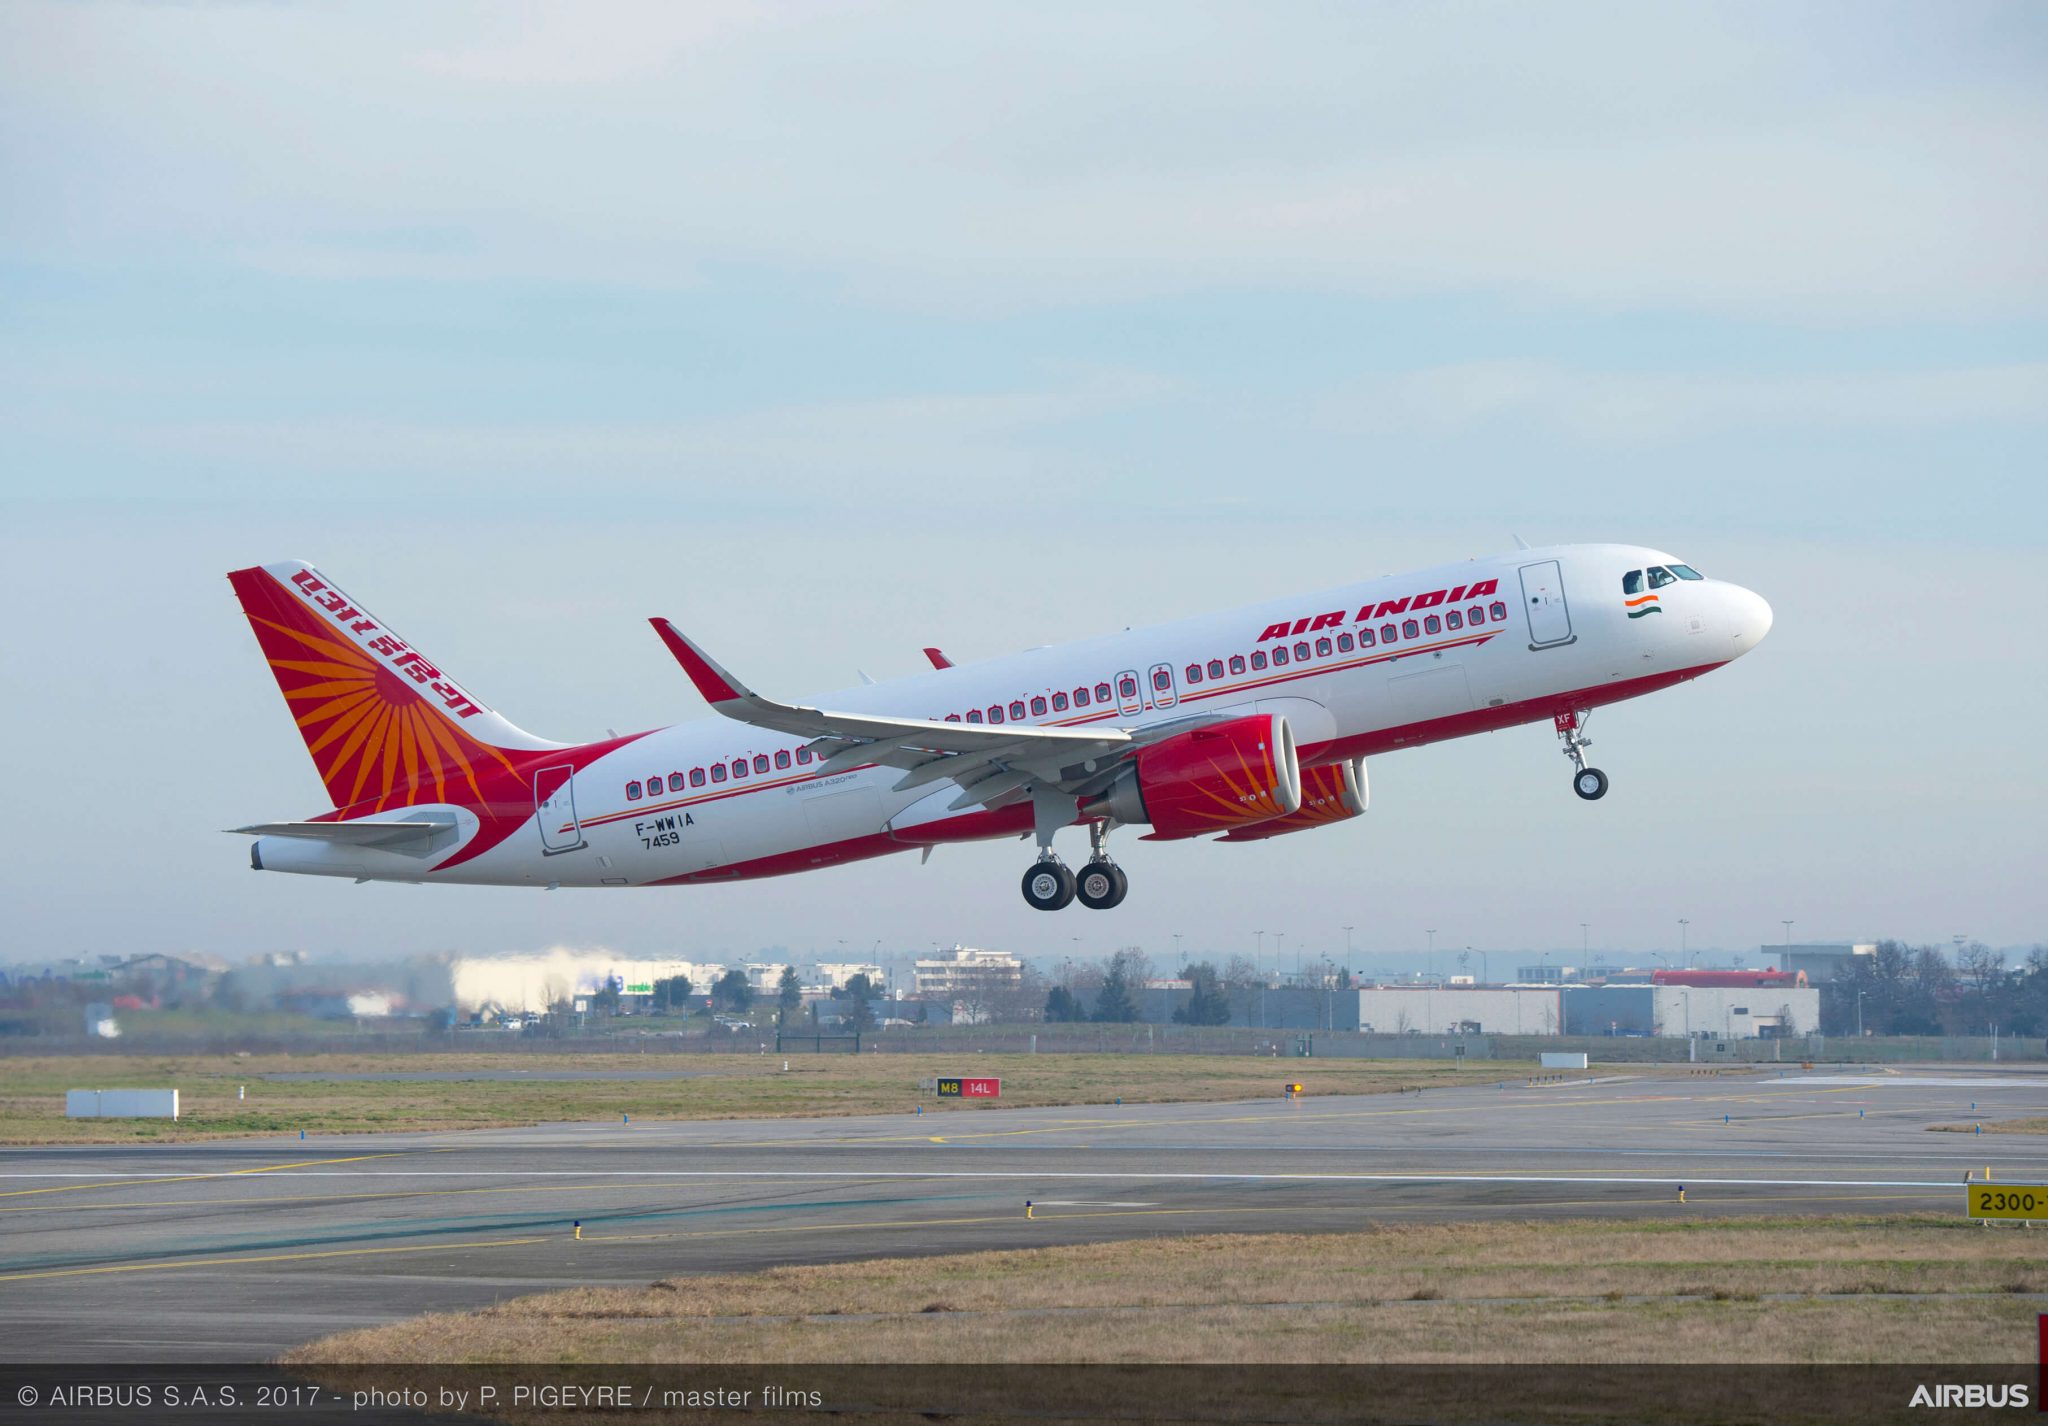 Air India aims for 30% market share in Indian domestic markets